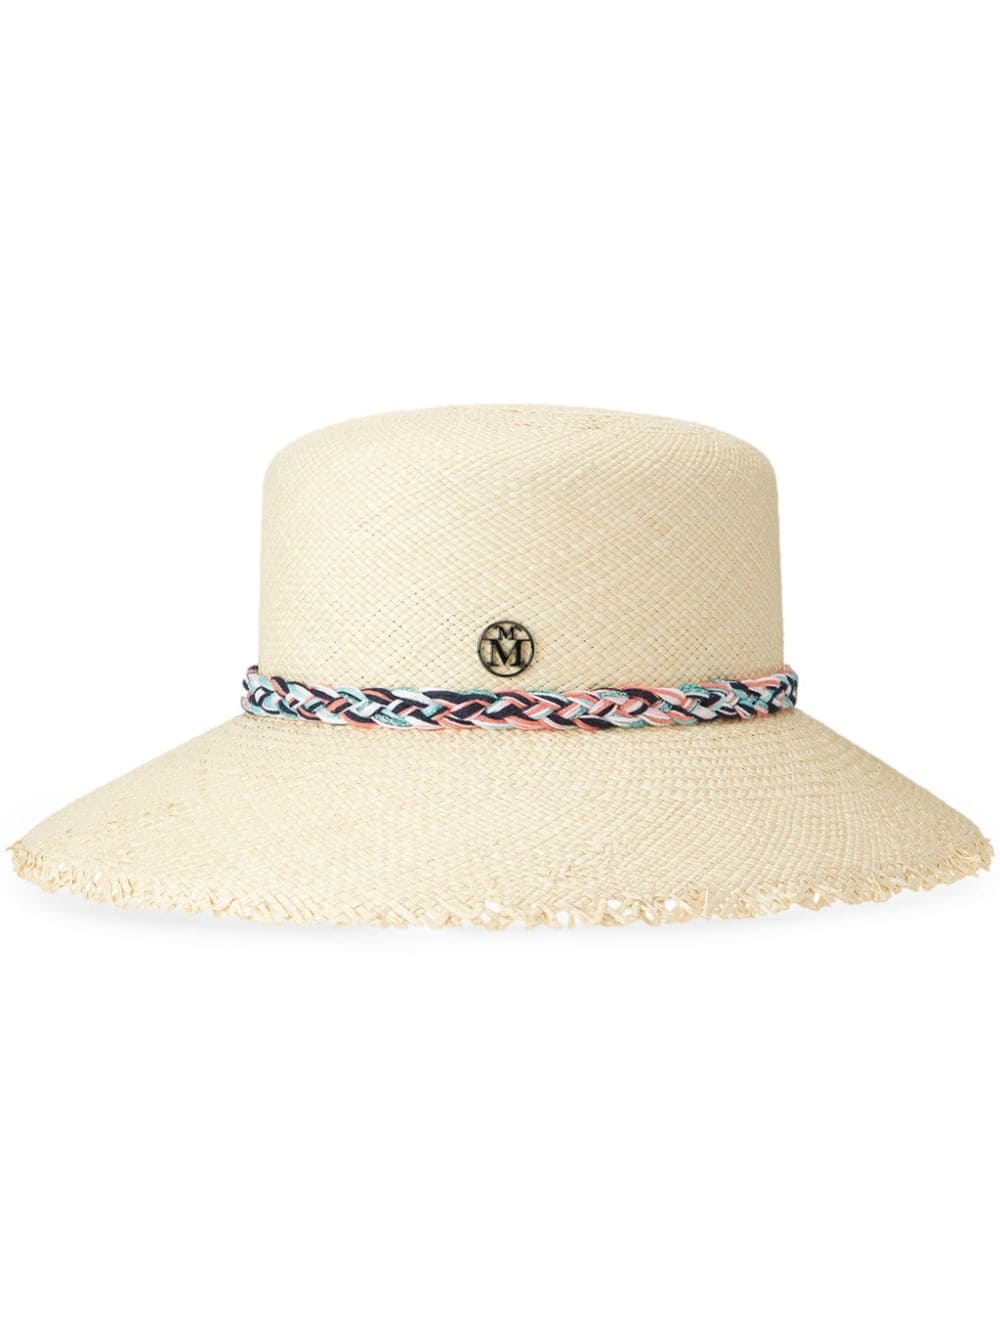 New Kendall braided-strap hat